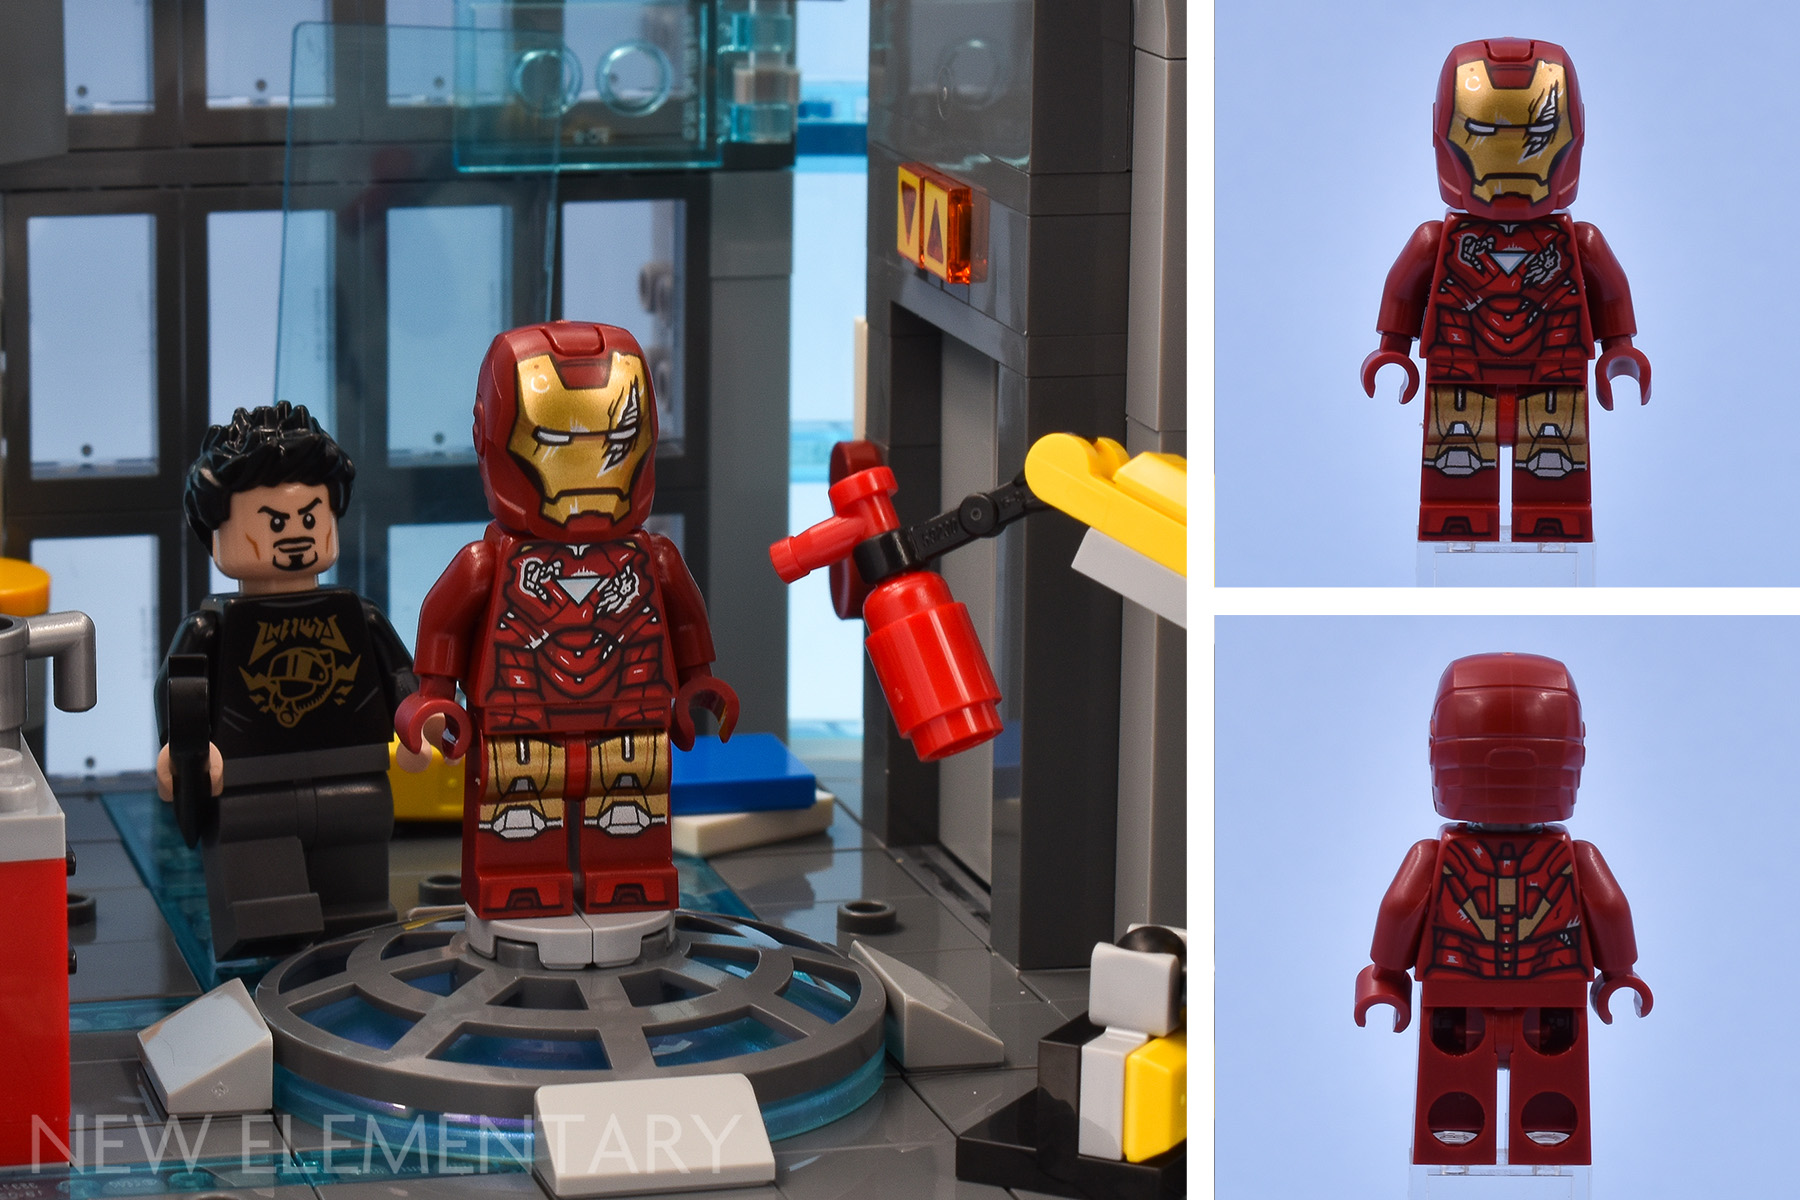 The 5,201-piece LEGO Avengers Tower (76269) is the ultimate MCU set and  even comes with a Kevin Feige - Jay's Brick Blog